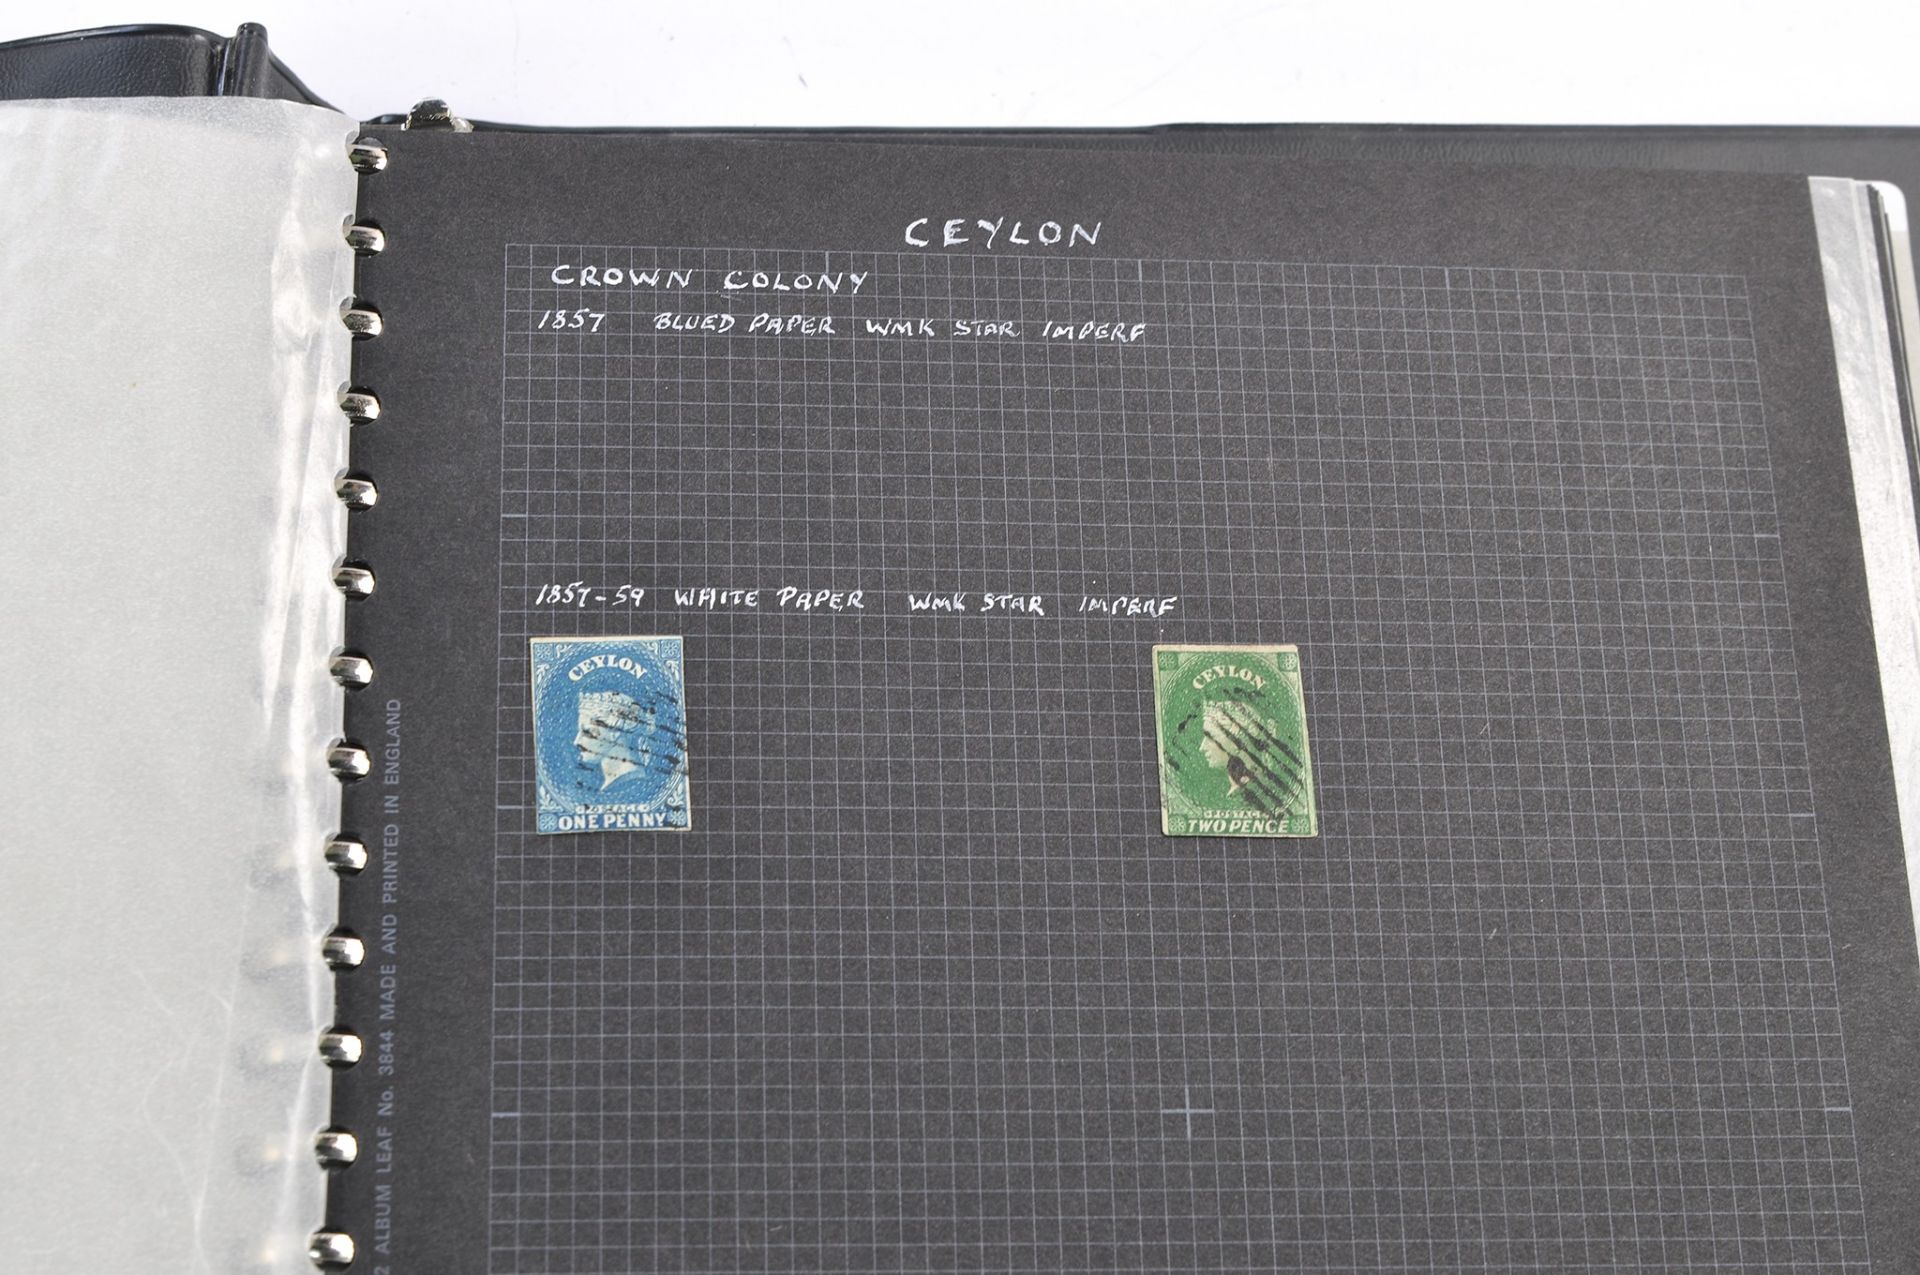 Stamps interest comprising large album of High Value Ceylon Stamps from 19th Century - Queen